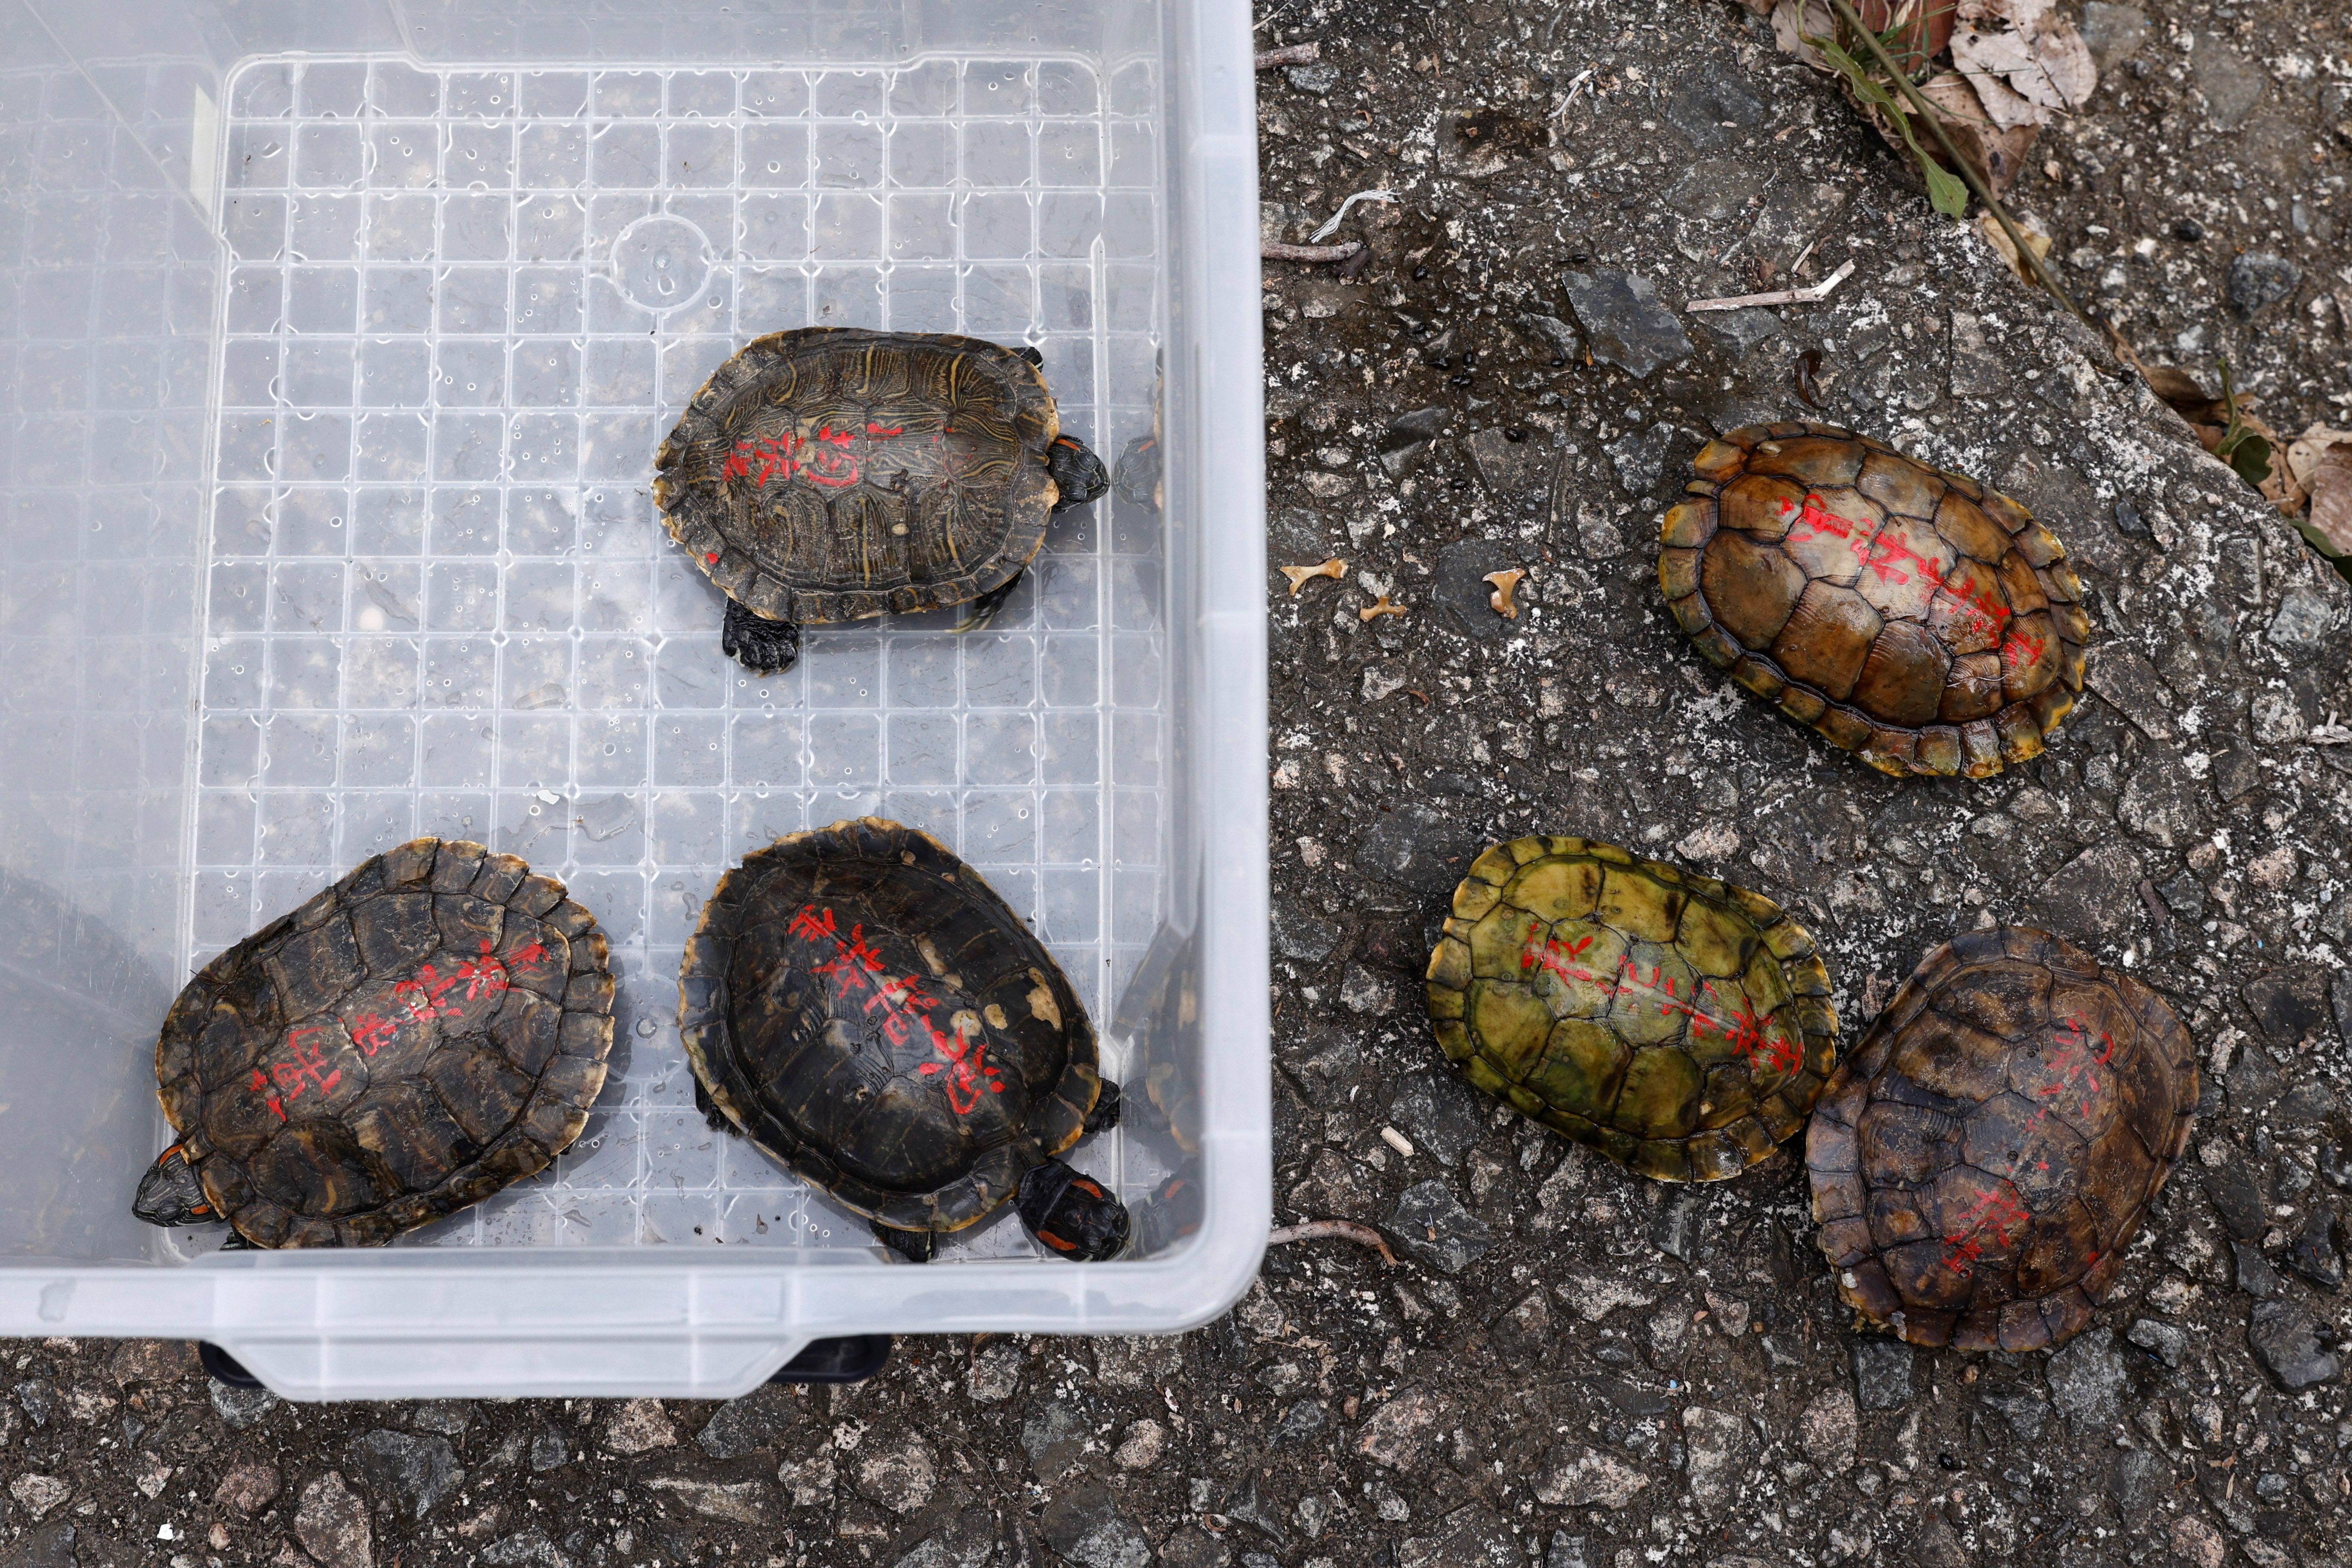 Some of the turtles collected had Some had ‘mercy release’ written on their shells in Chinese characters